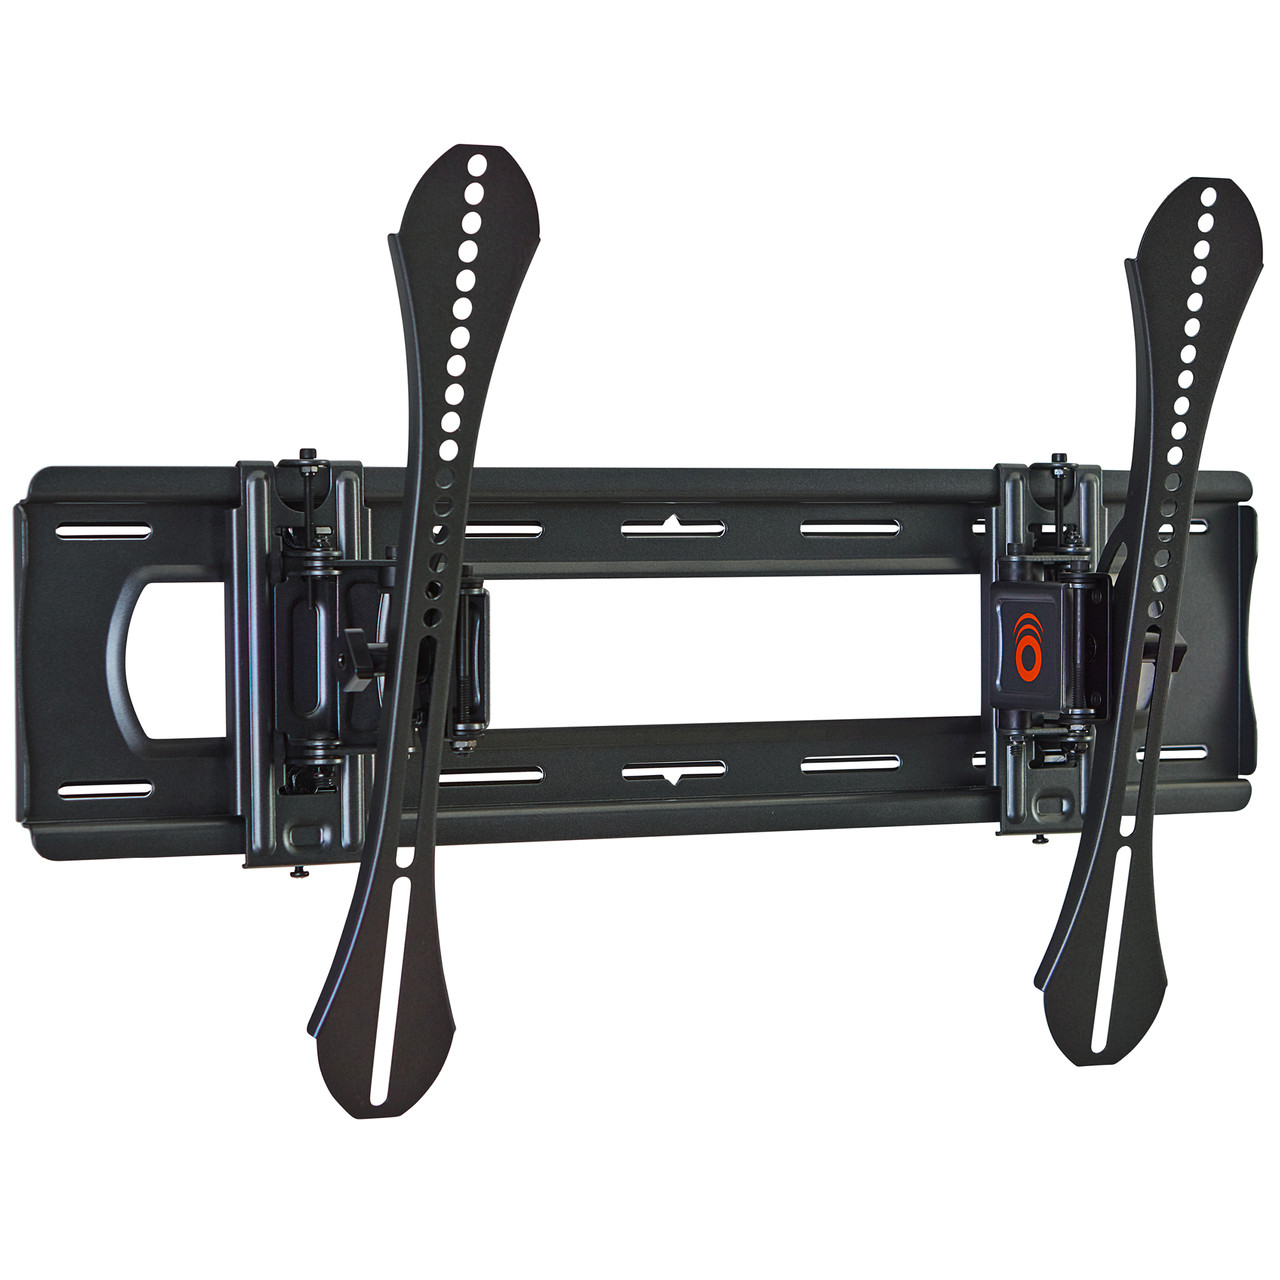 PERLEGEAR tilt TV wall mount PGLT2 for most 37-82 in tv's up to 132 lbs